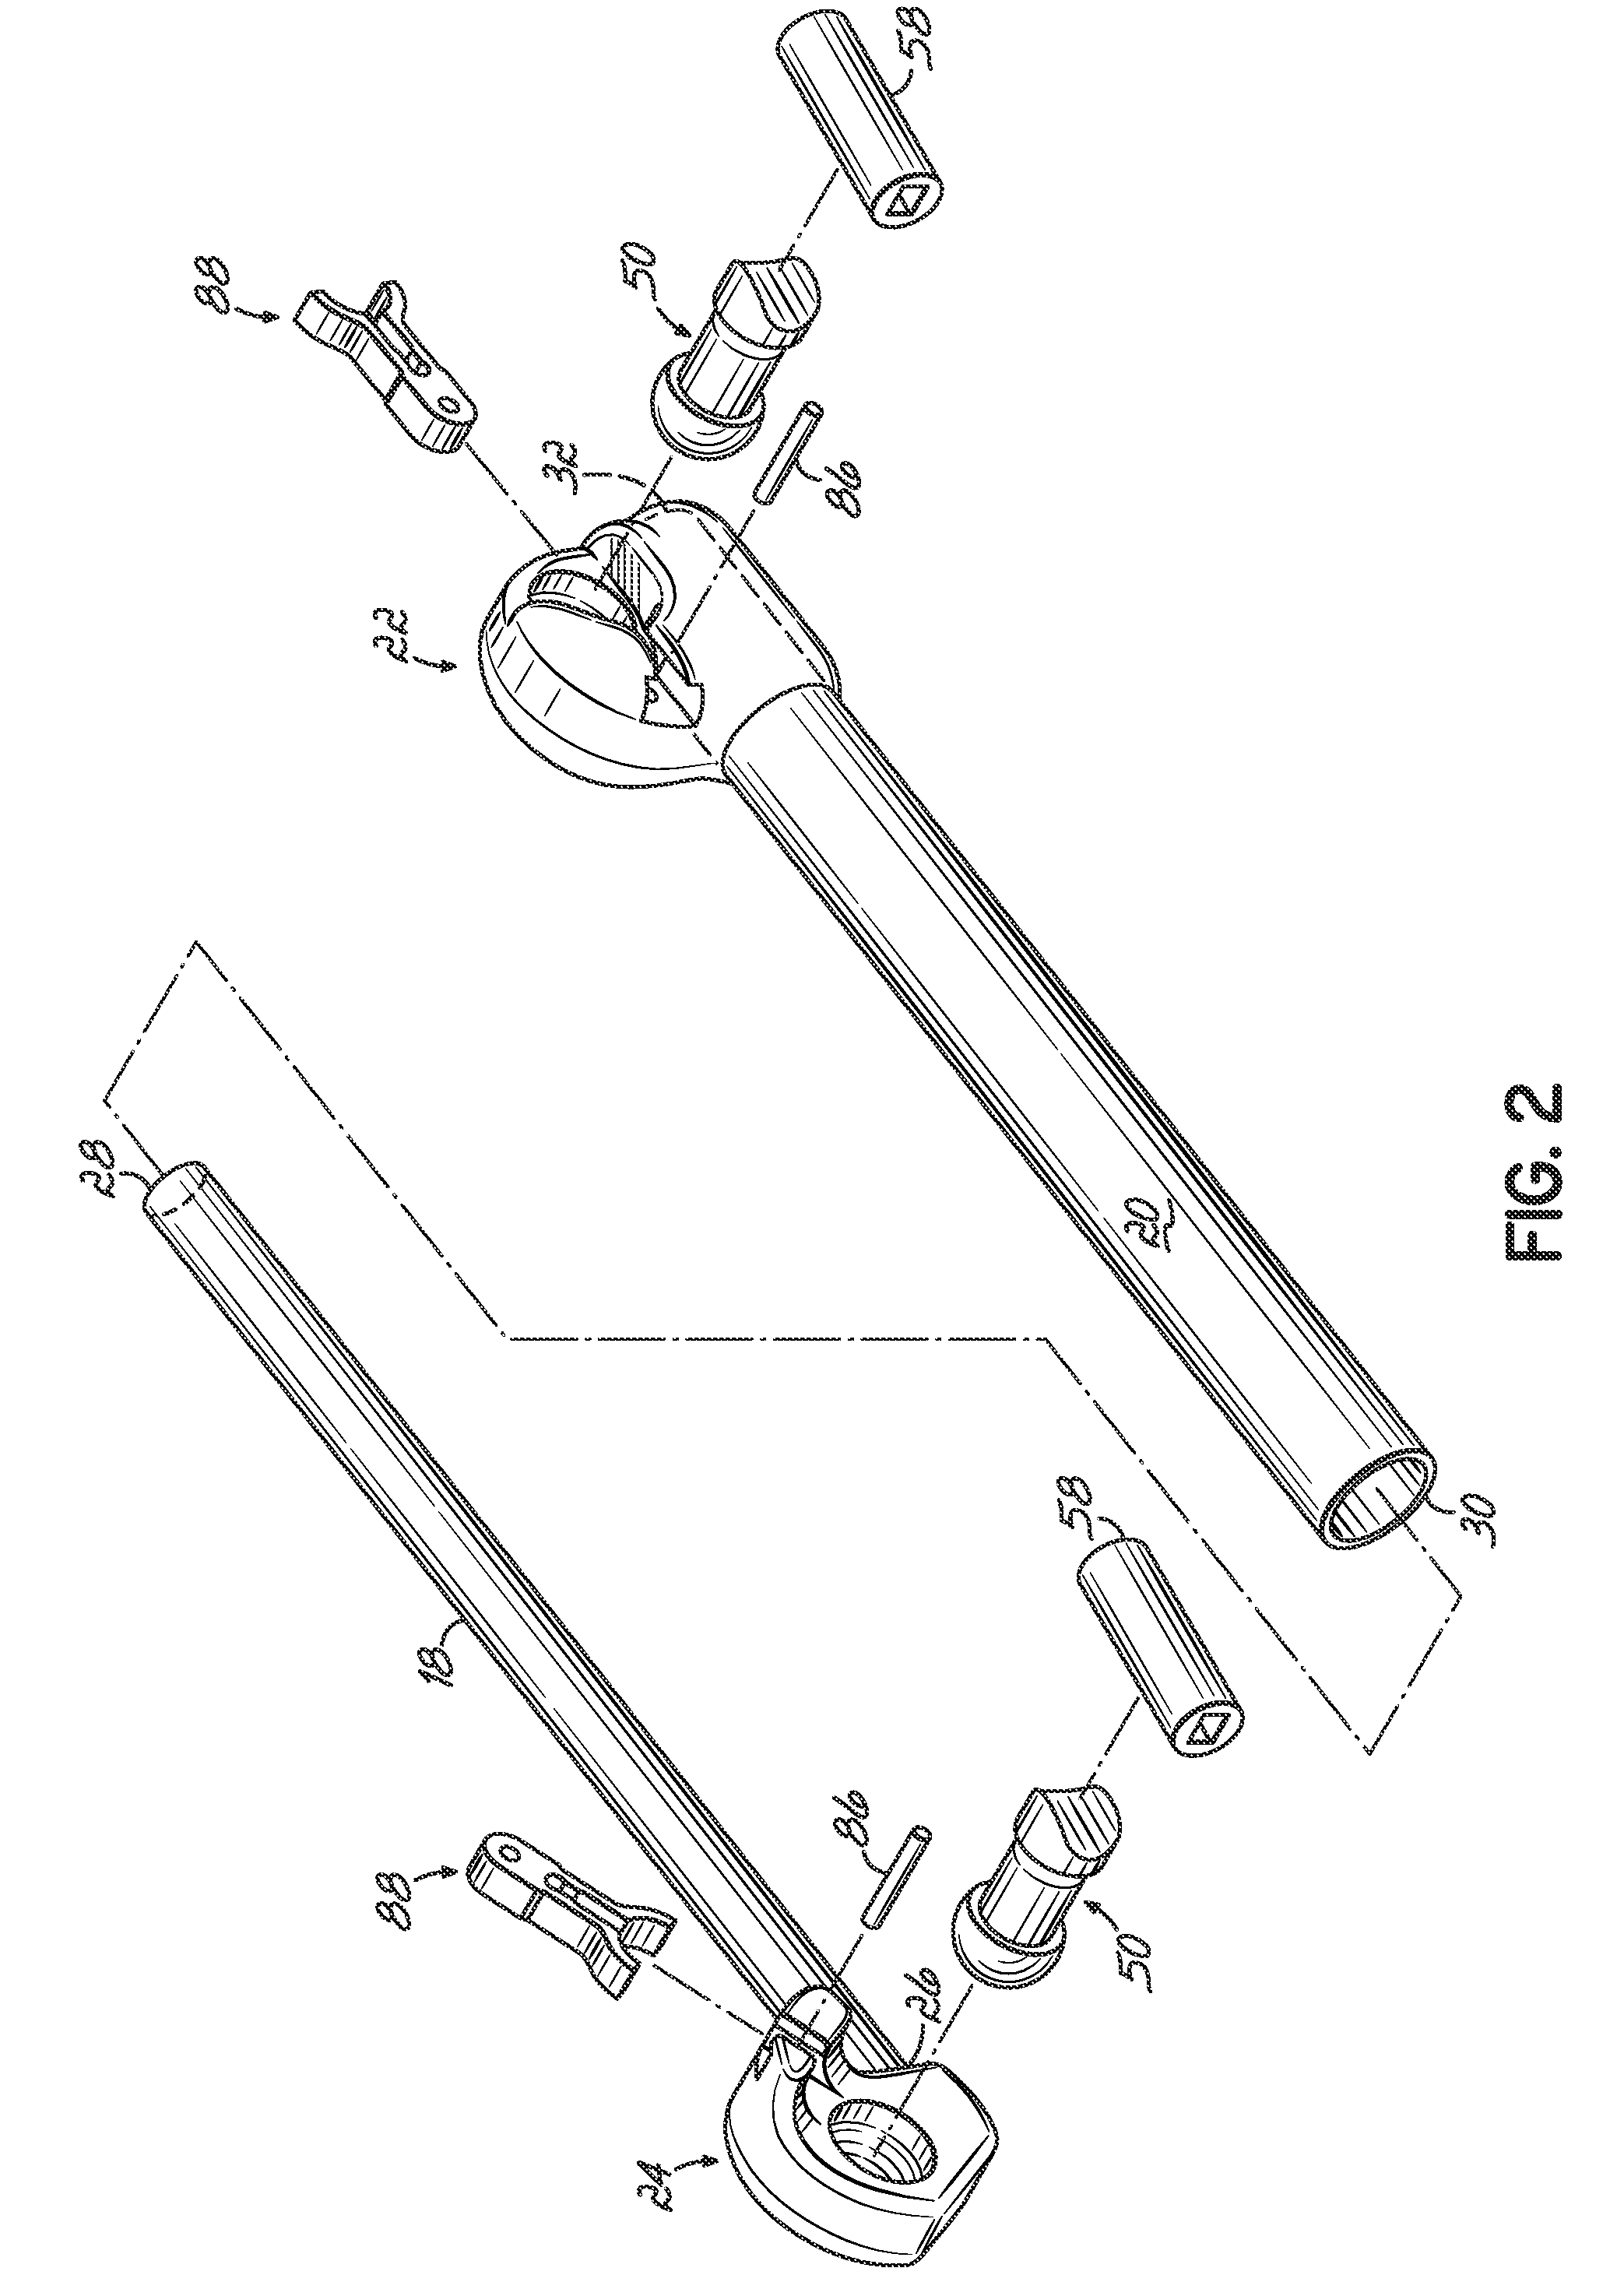 Orthodontic device and method for treating malocclusions